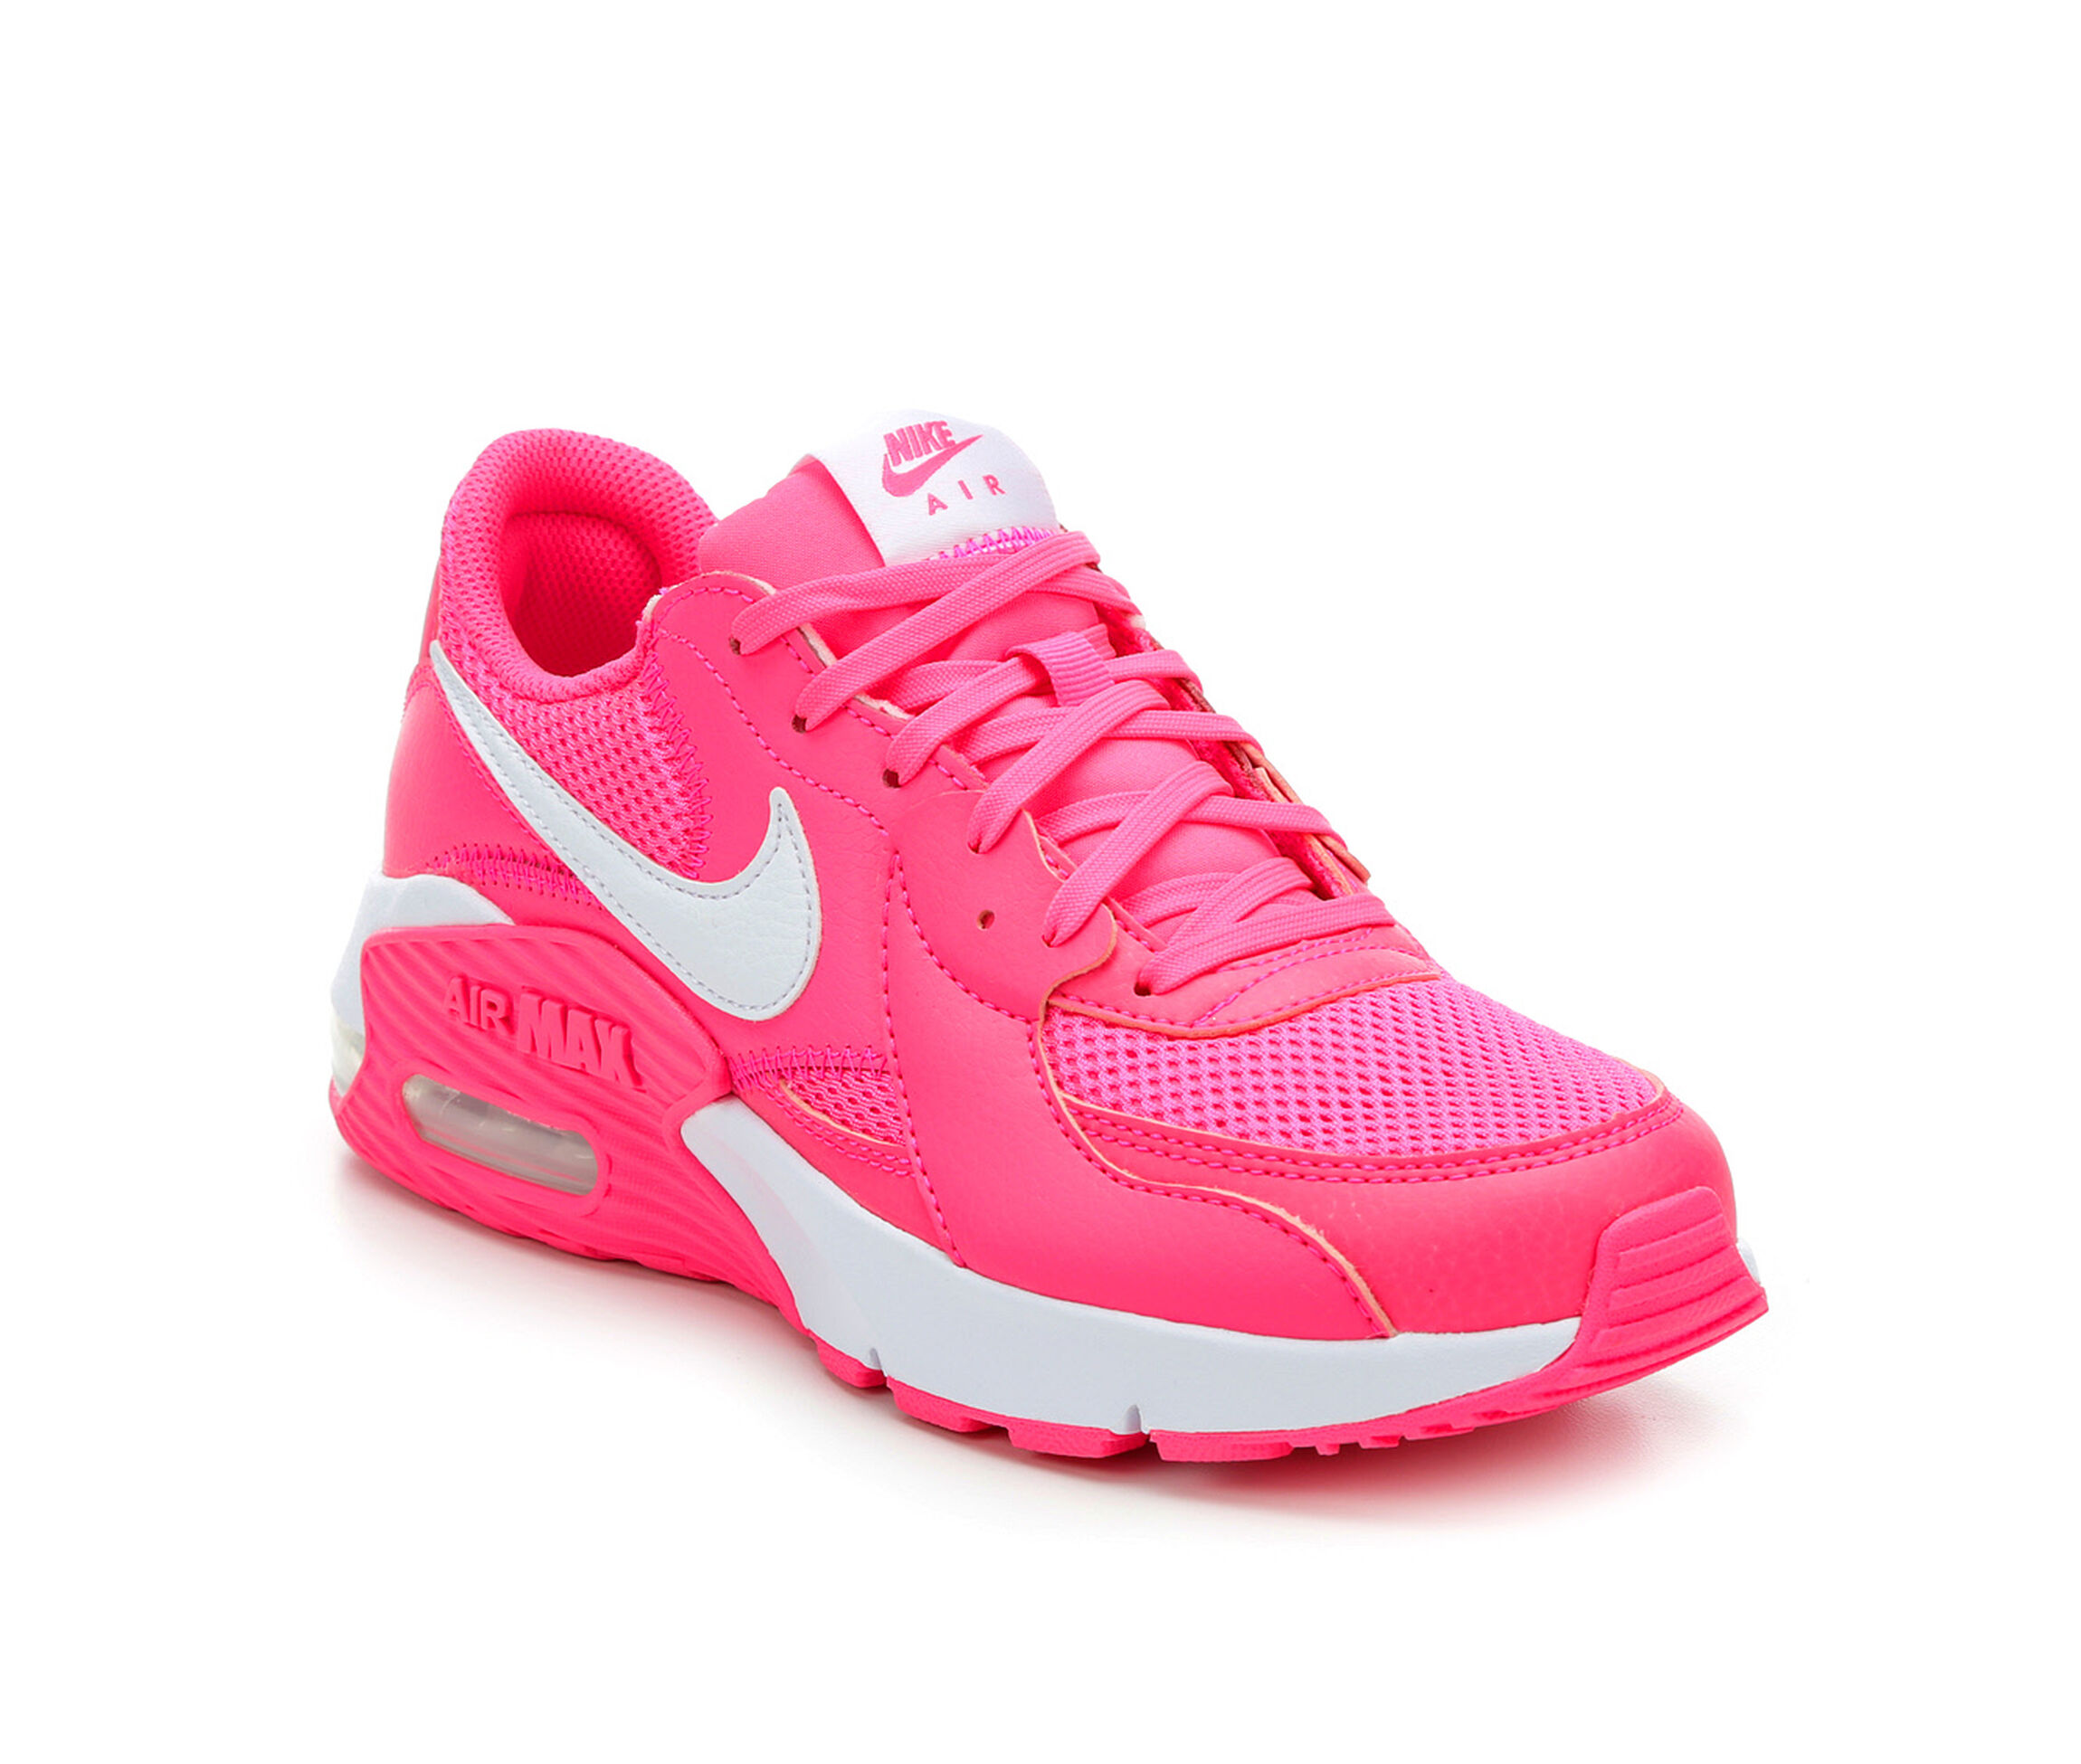 Nike Shoes, Air Max, Accessories | Shoe Carnival